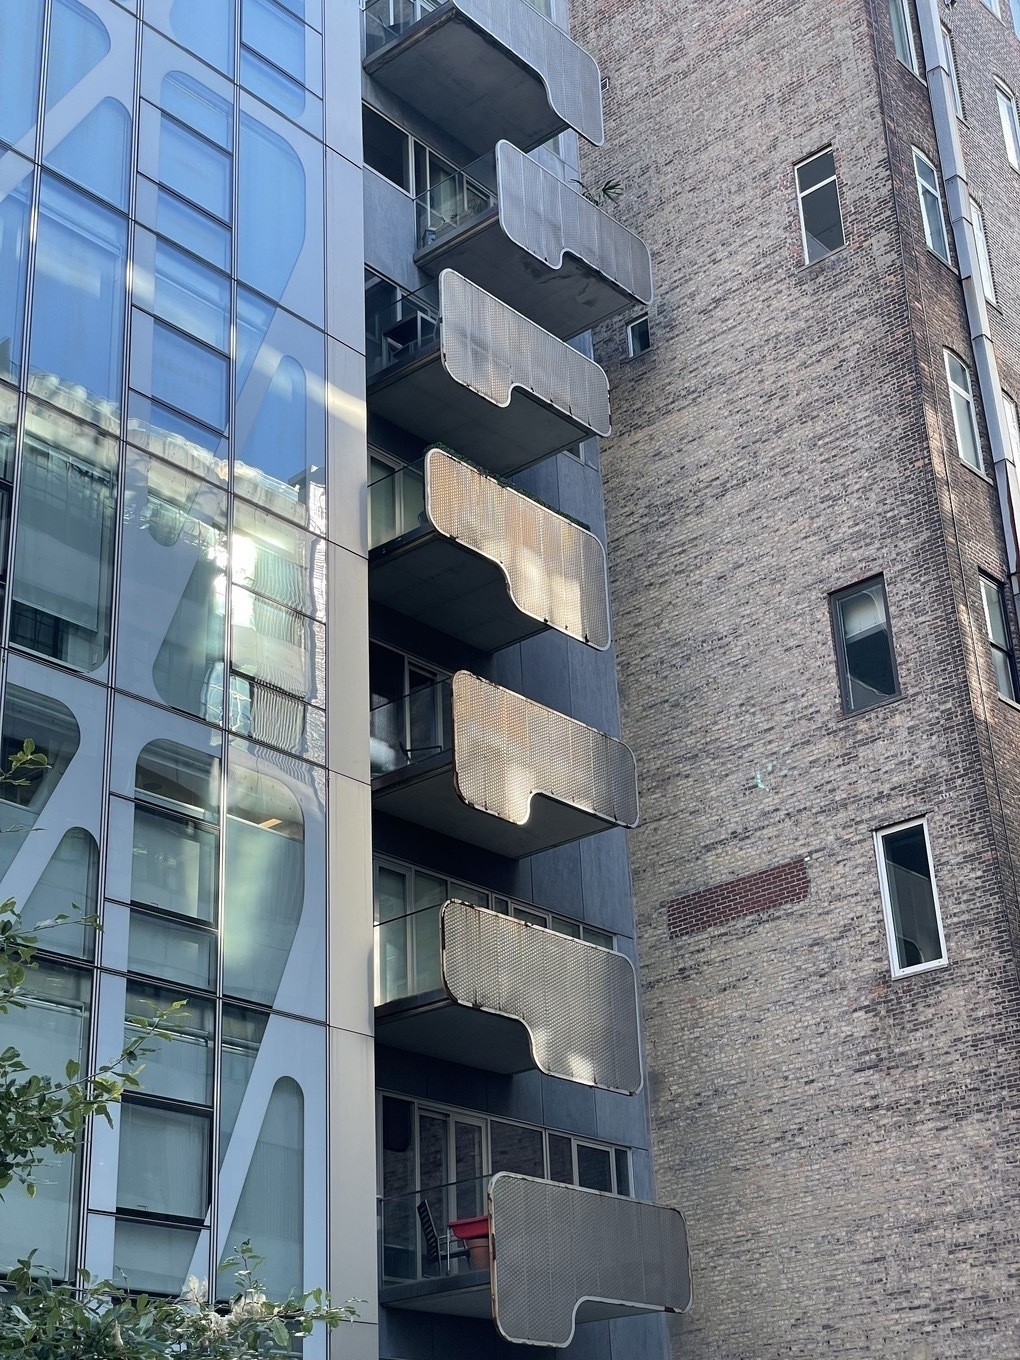 Iron tetris-shaped balconies from the Highline.